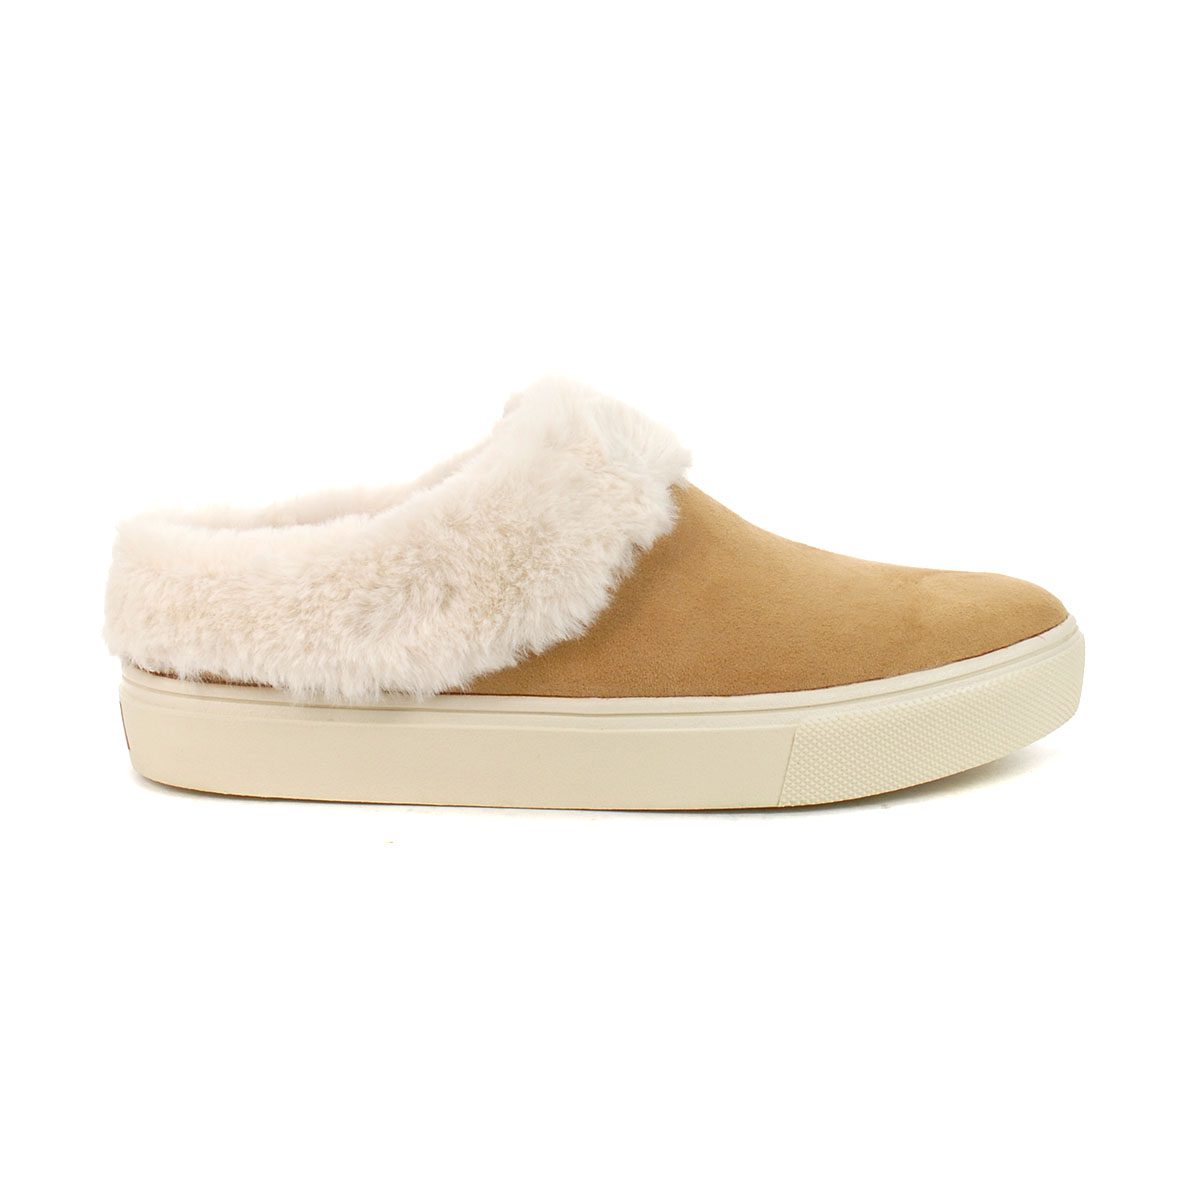 Dr. Scholl's Now Chill Tan Cozy Slippers H3047F1200 - WOOKI.COM